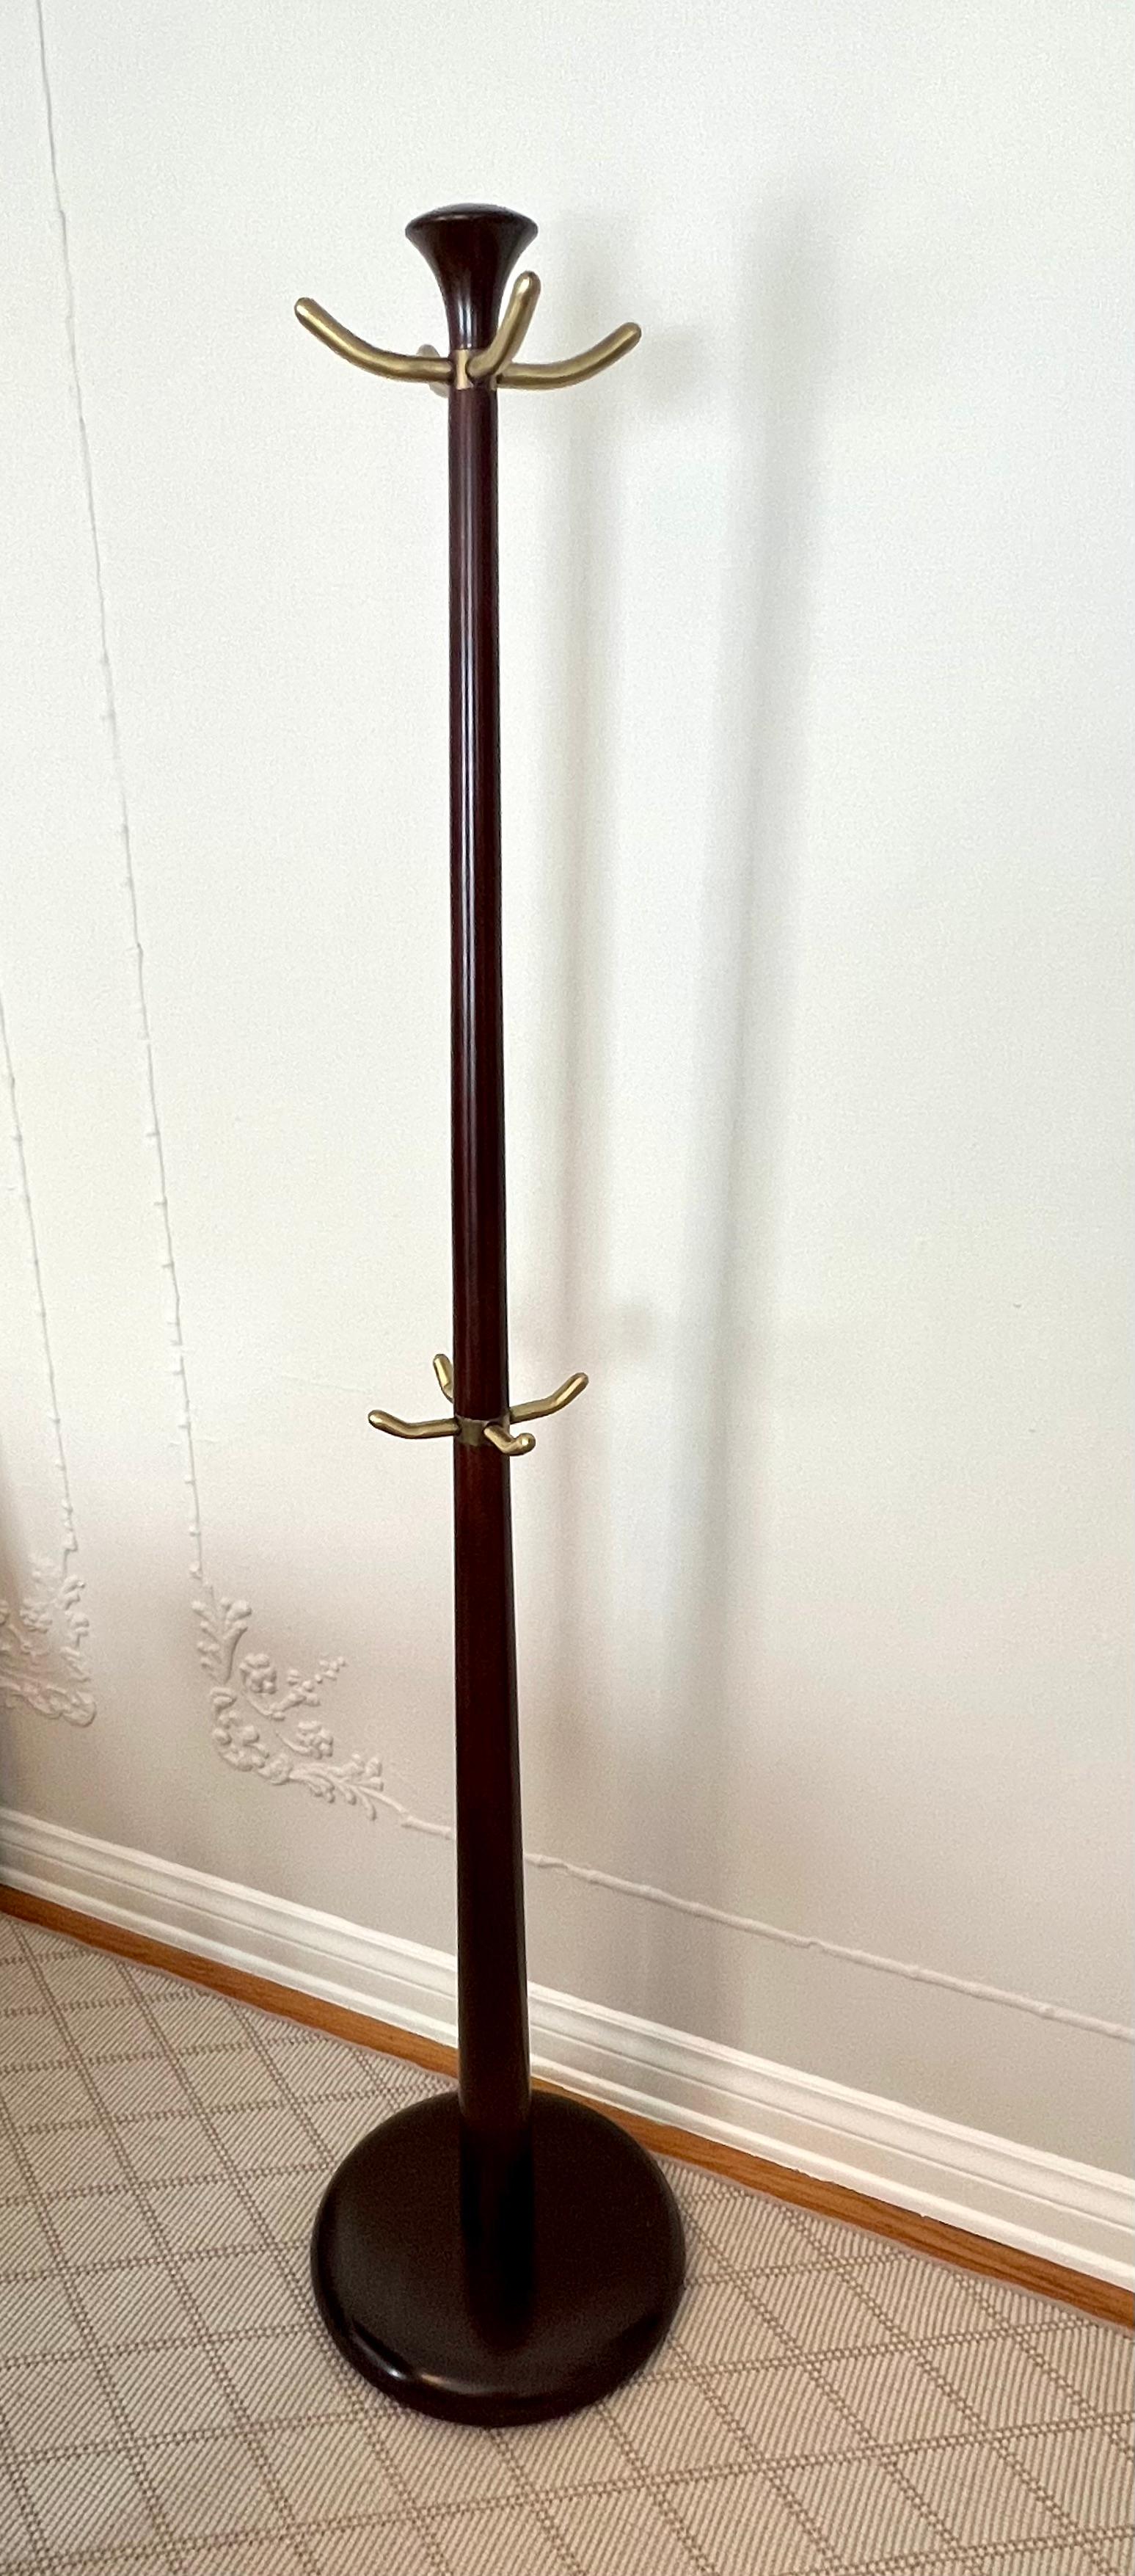 A wonderful coat rack, inspired by an Italian design from the 1940's. 

Tall and architectural, at 72